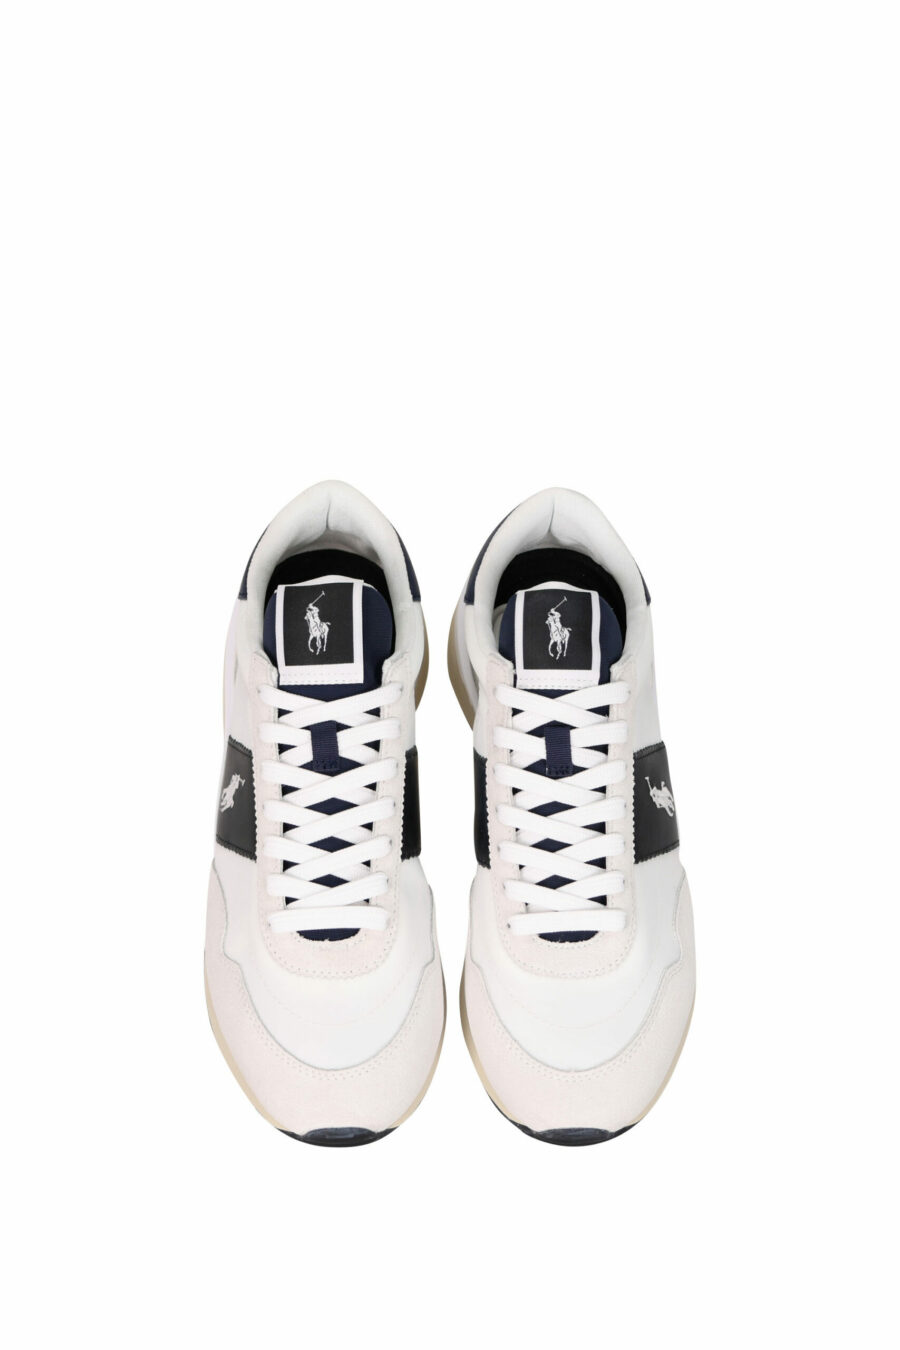 Trainers white and blue detail "train" with white "polo" minilogue - 3616535114890 5 scaled